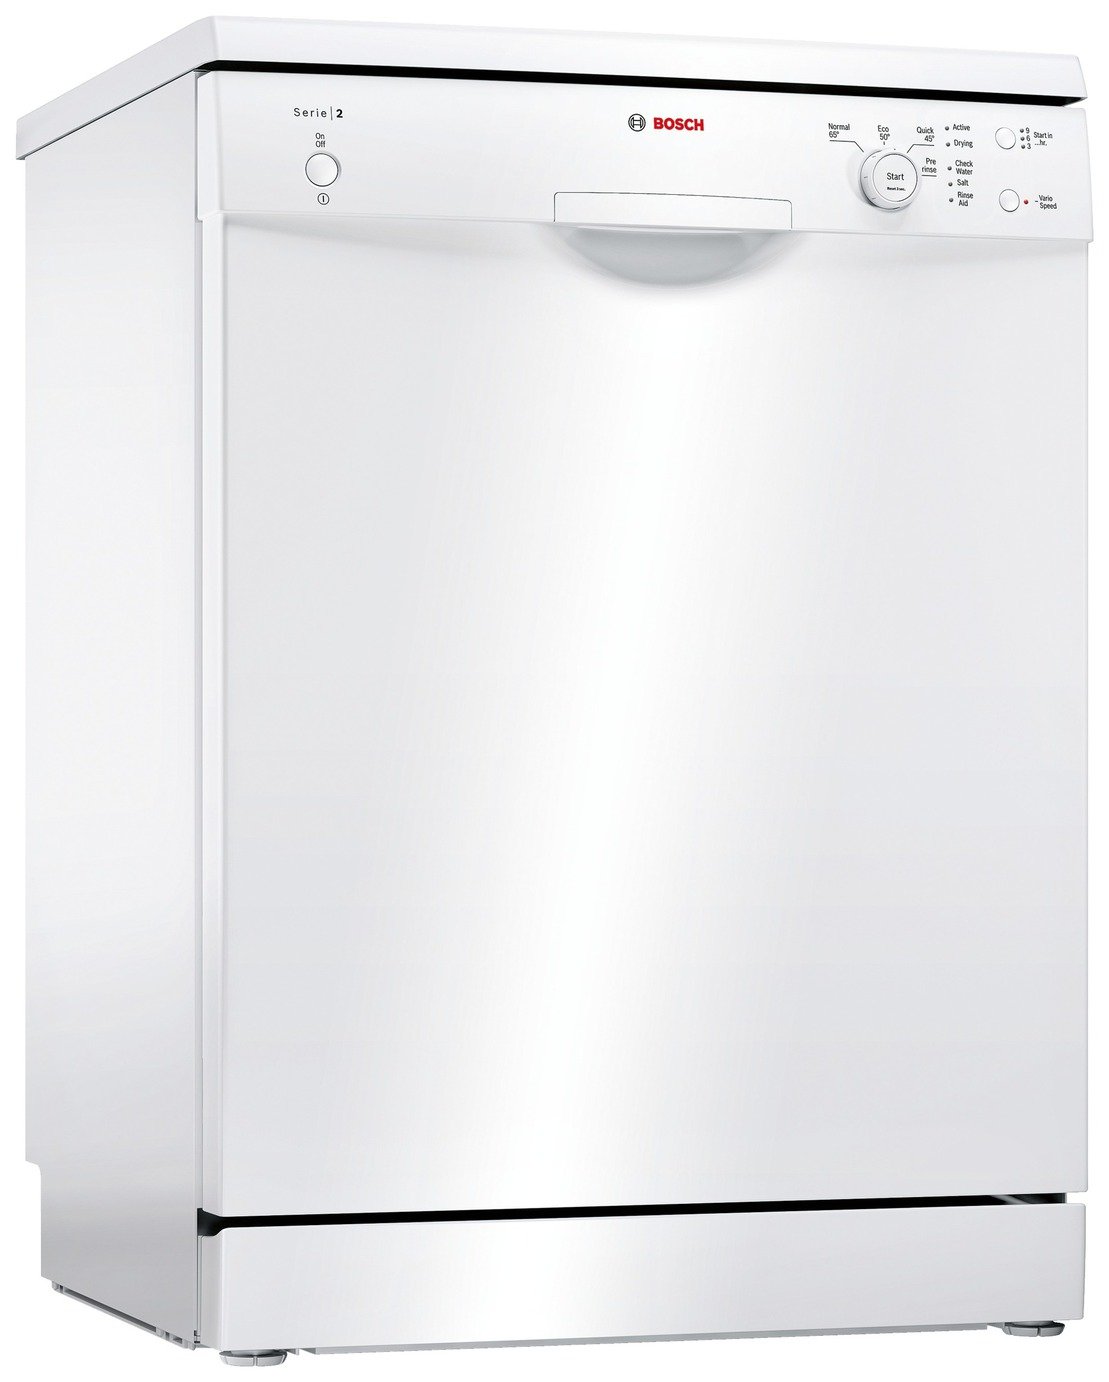 Bosch SMS24AW01G Full Size Dishwasher Review